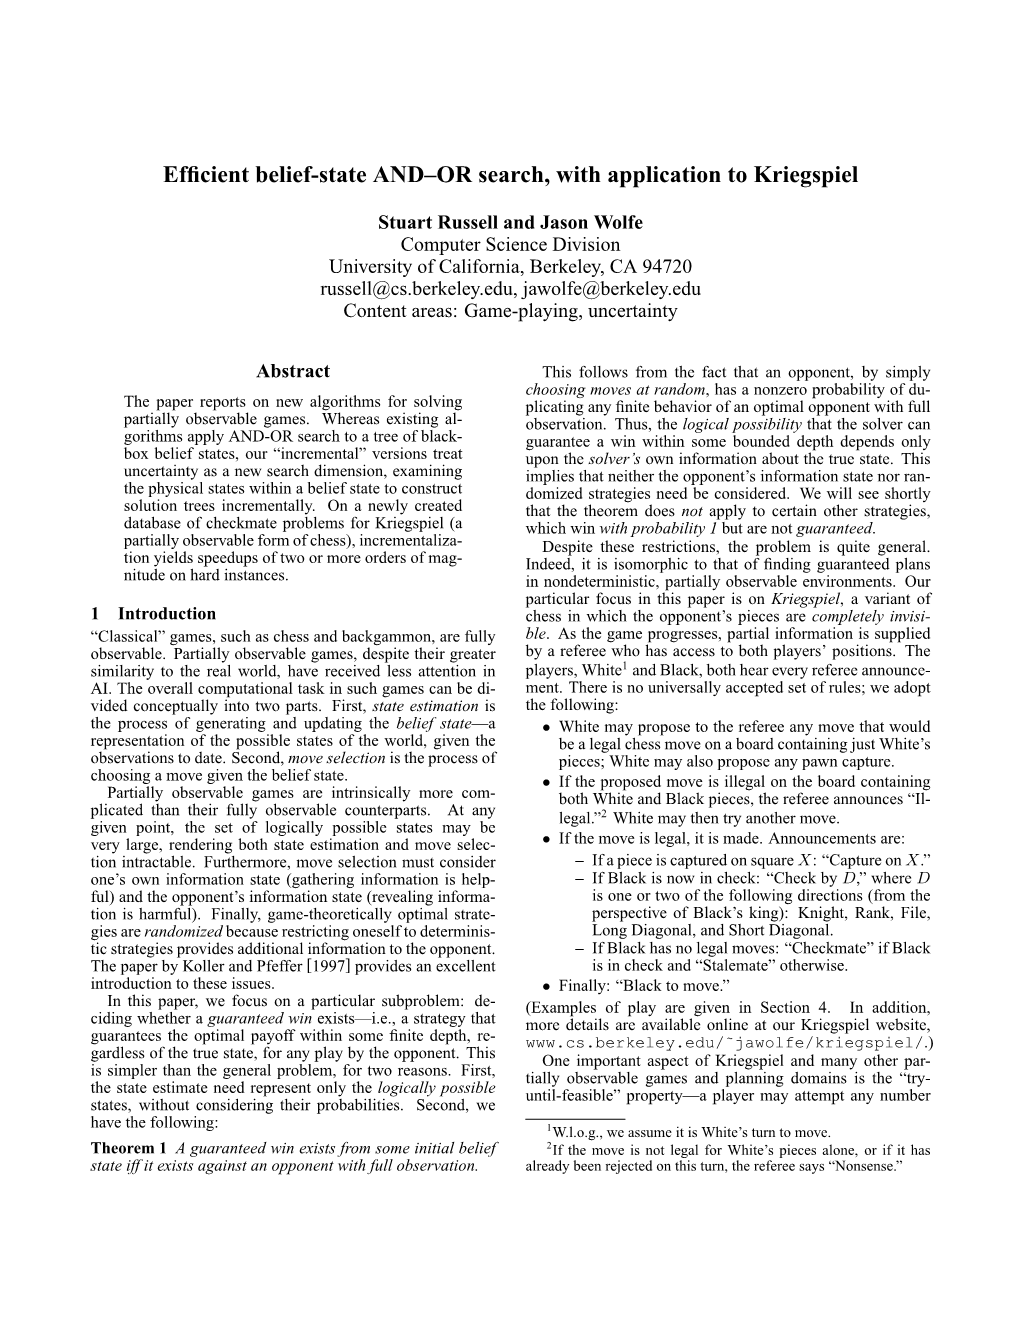 Efficient Belief-State AND–OR Search, with Application to Kriegspiel